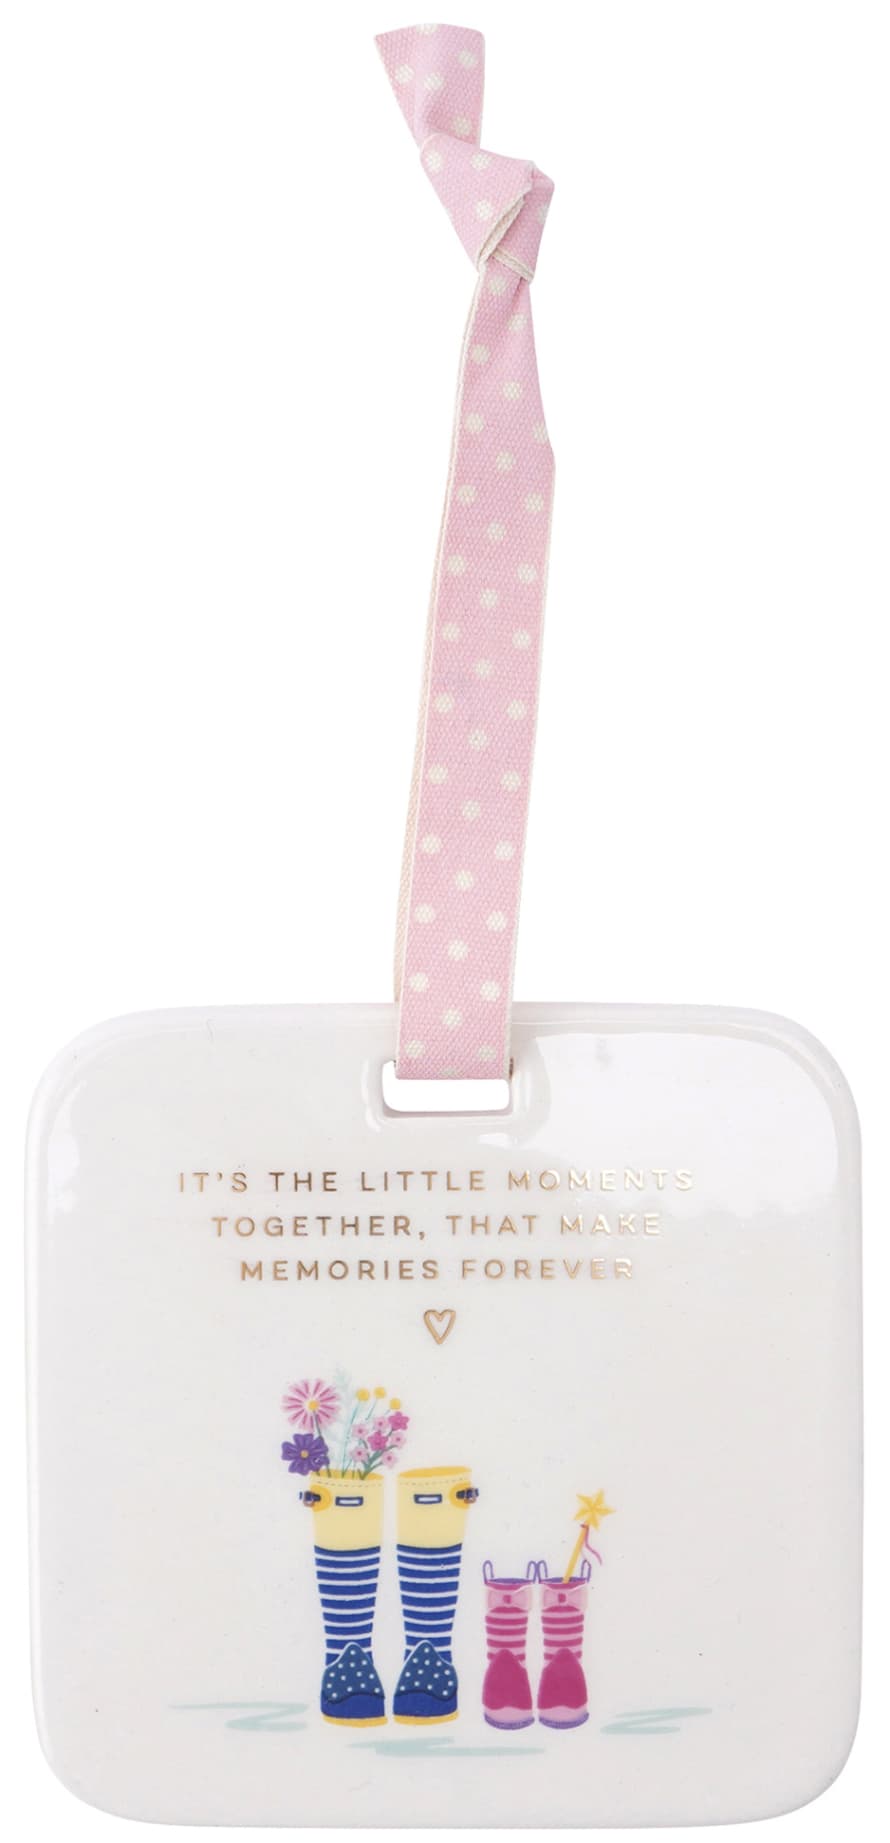 CGB Giftware The Little Moments Together Ceramic Hanging Decoration